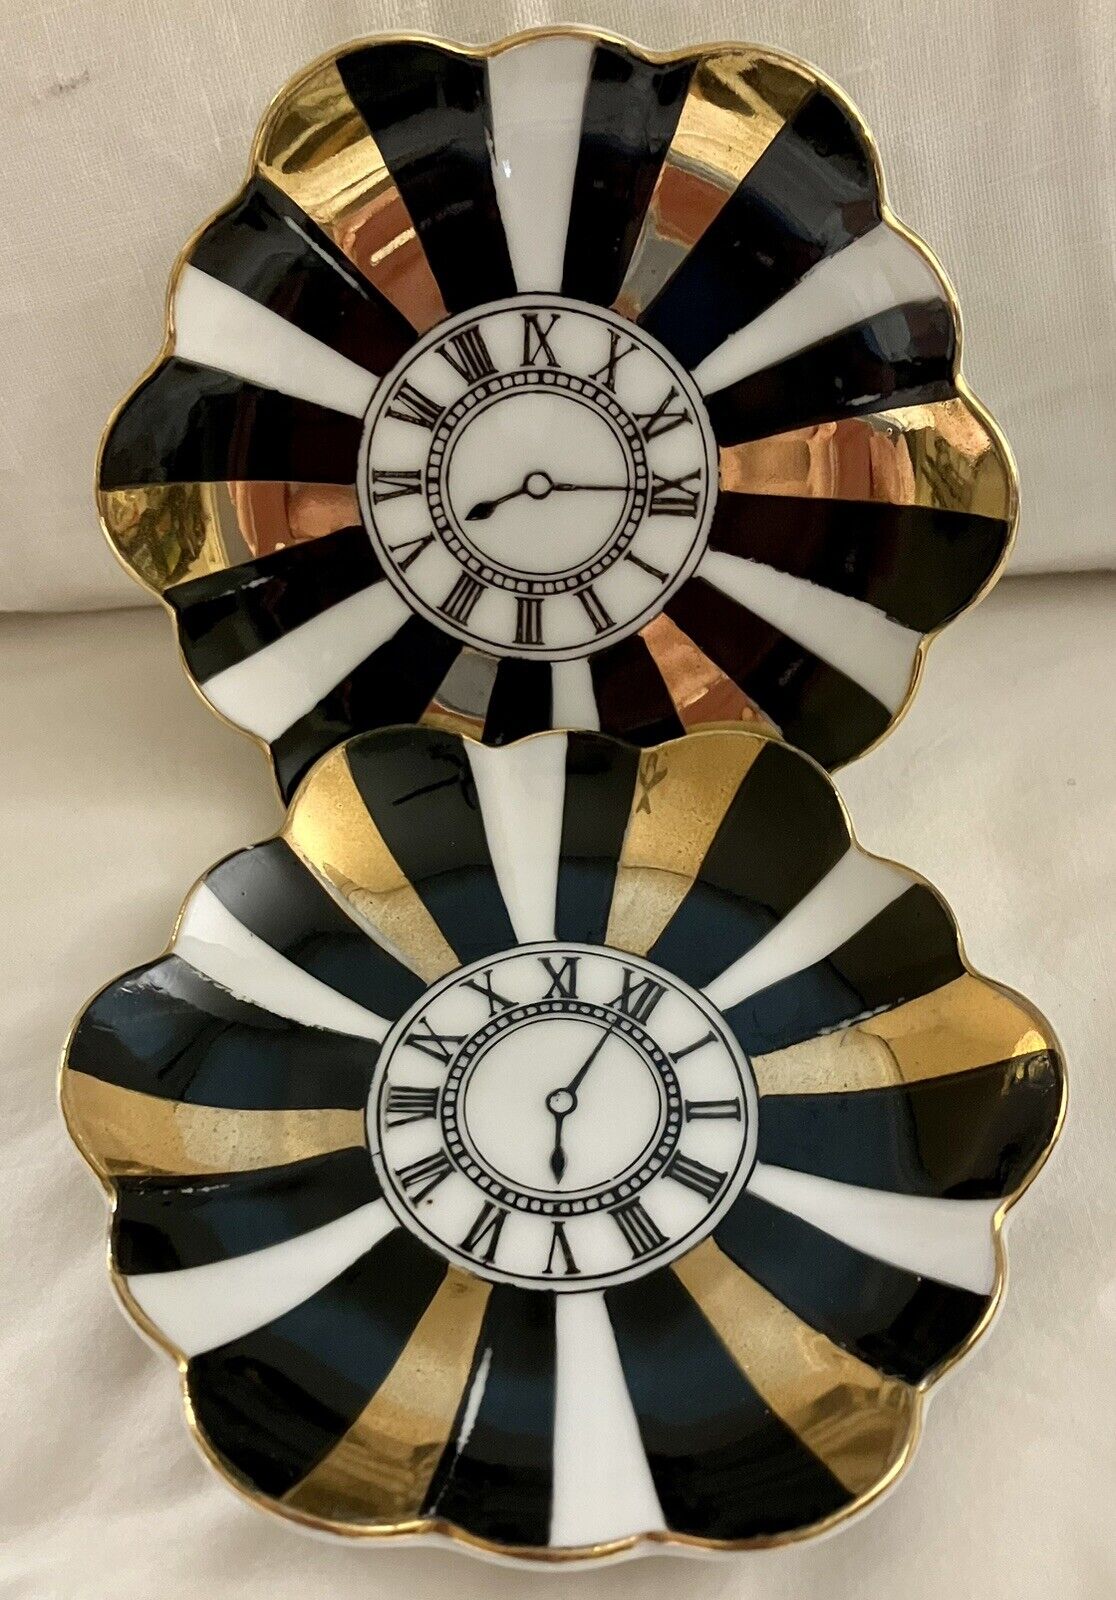 2 RARE Fornasetti for Bergdorf Goodman Porcelain Trinket Dishes with Clock Motif